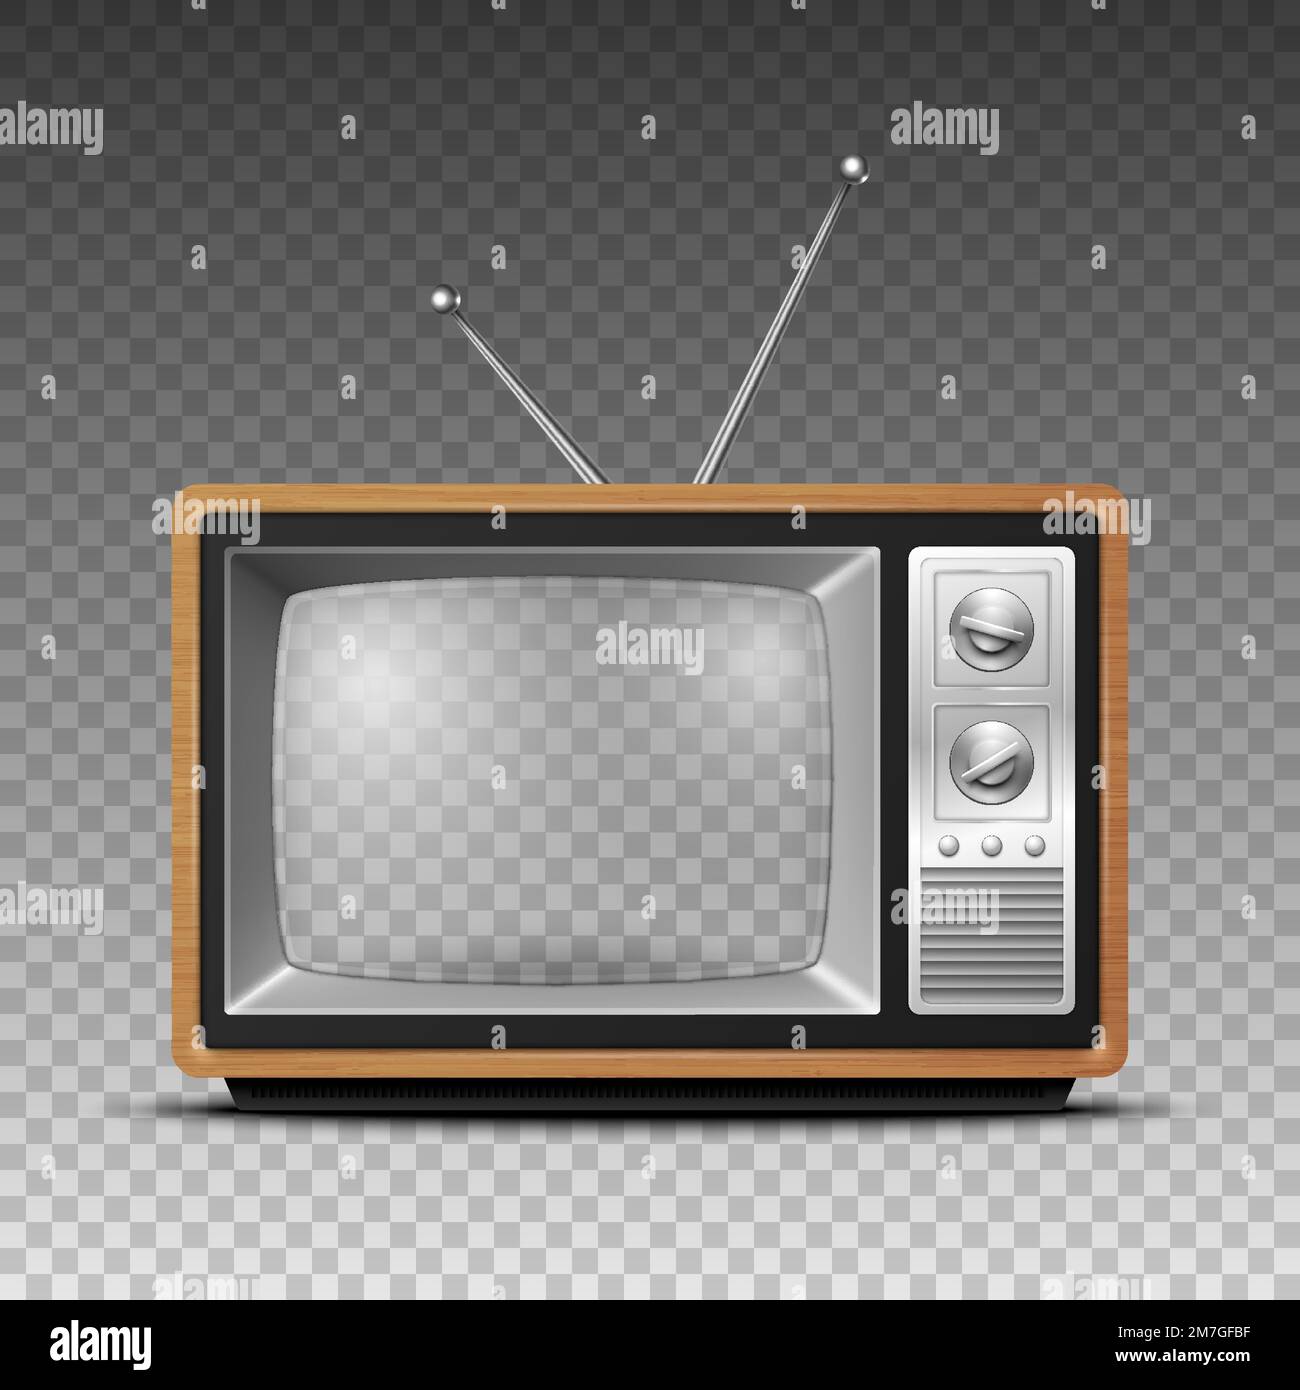 Vector 3d Realistic Brown Wooden Retro TV Receiver with Transparent Screen Isolated. Home Interior Design Concept. Vintage TV Set, Television, Front Stock Vector